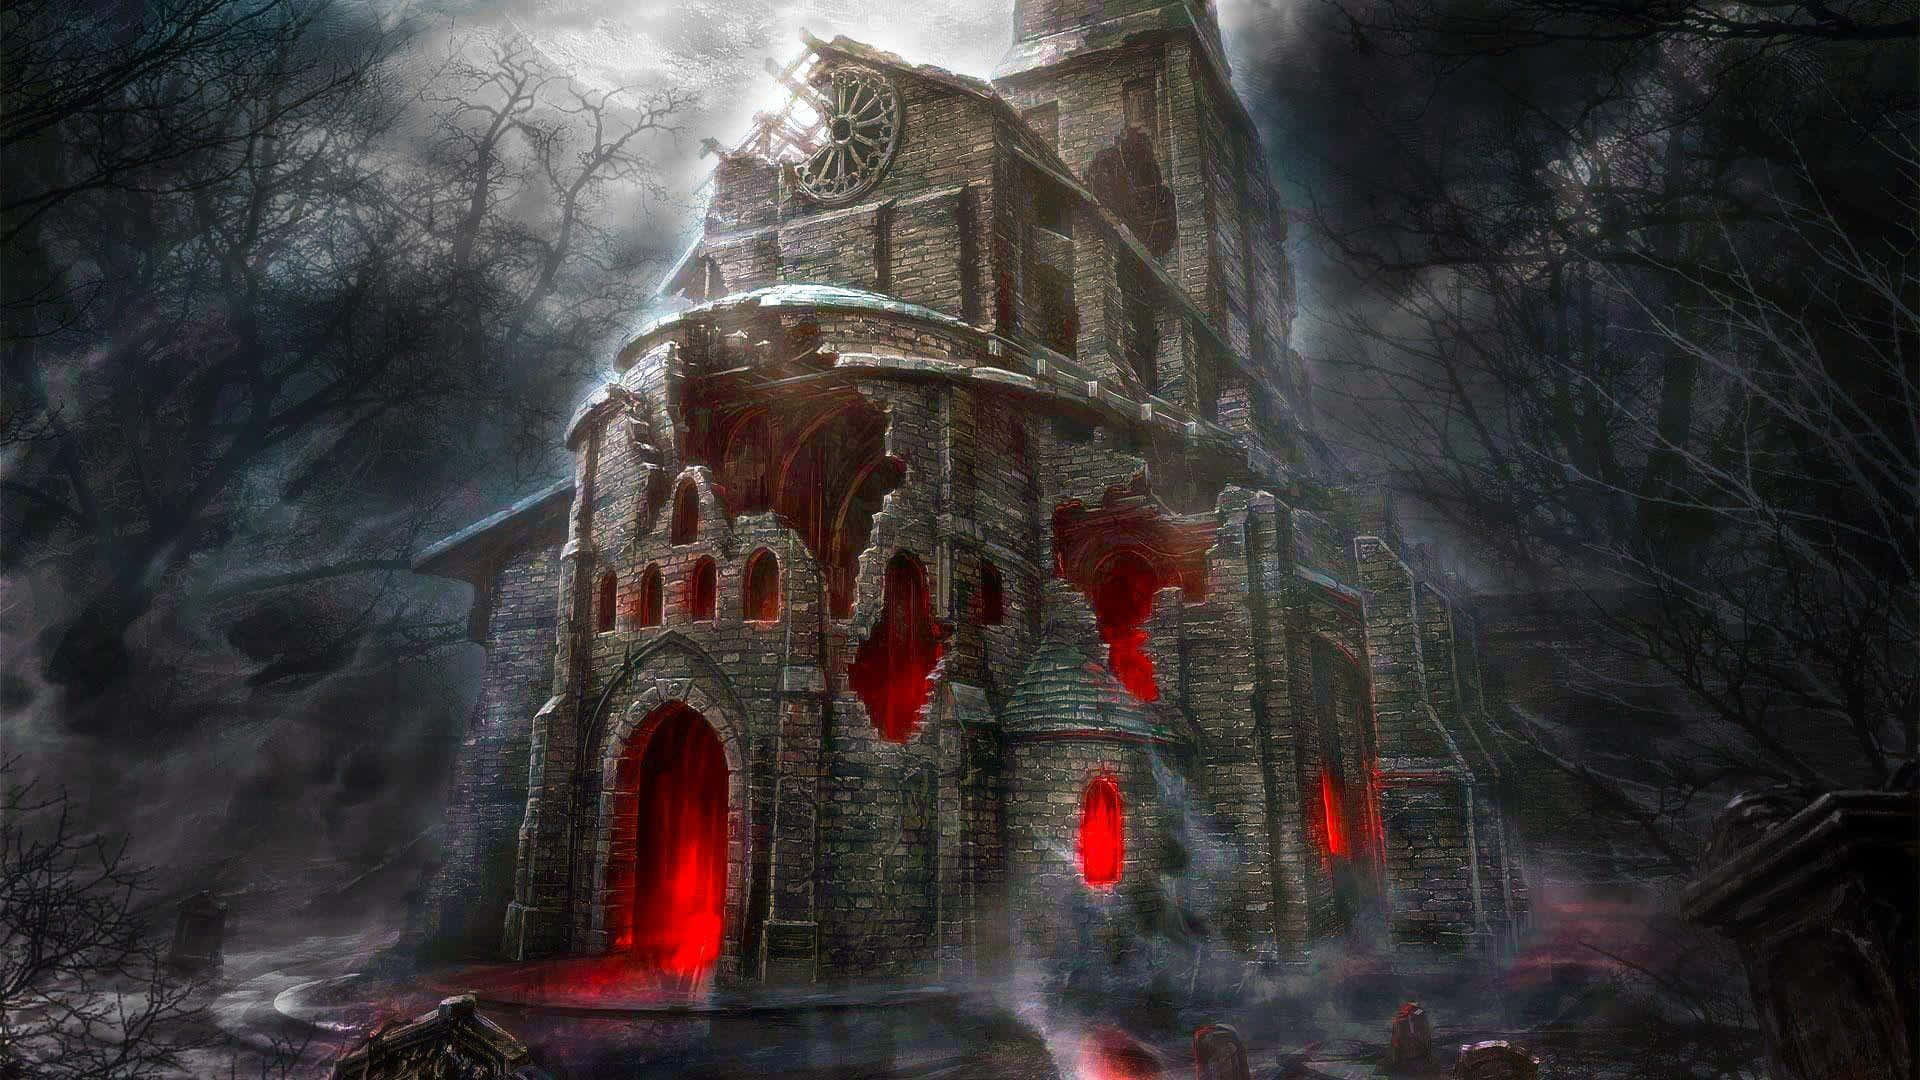 Dare to Enter the Eerie Haunted House